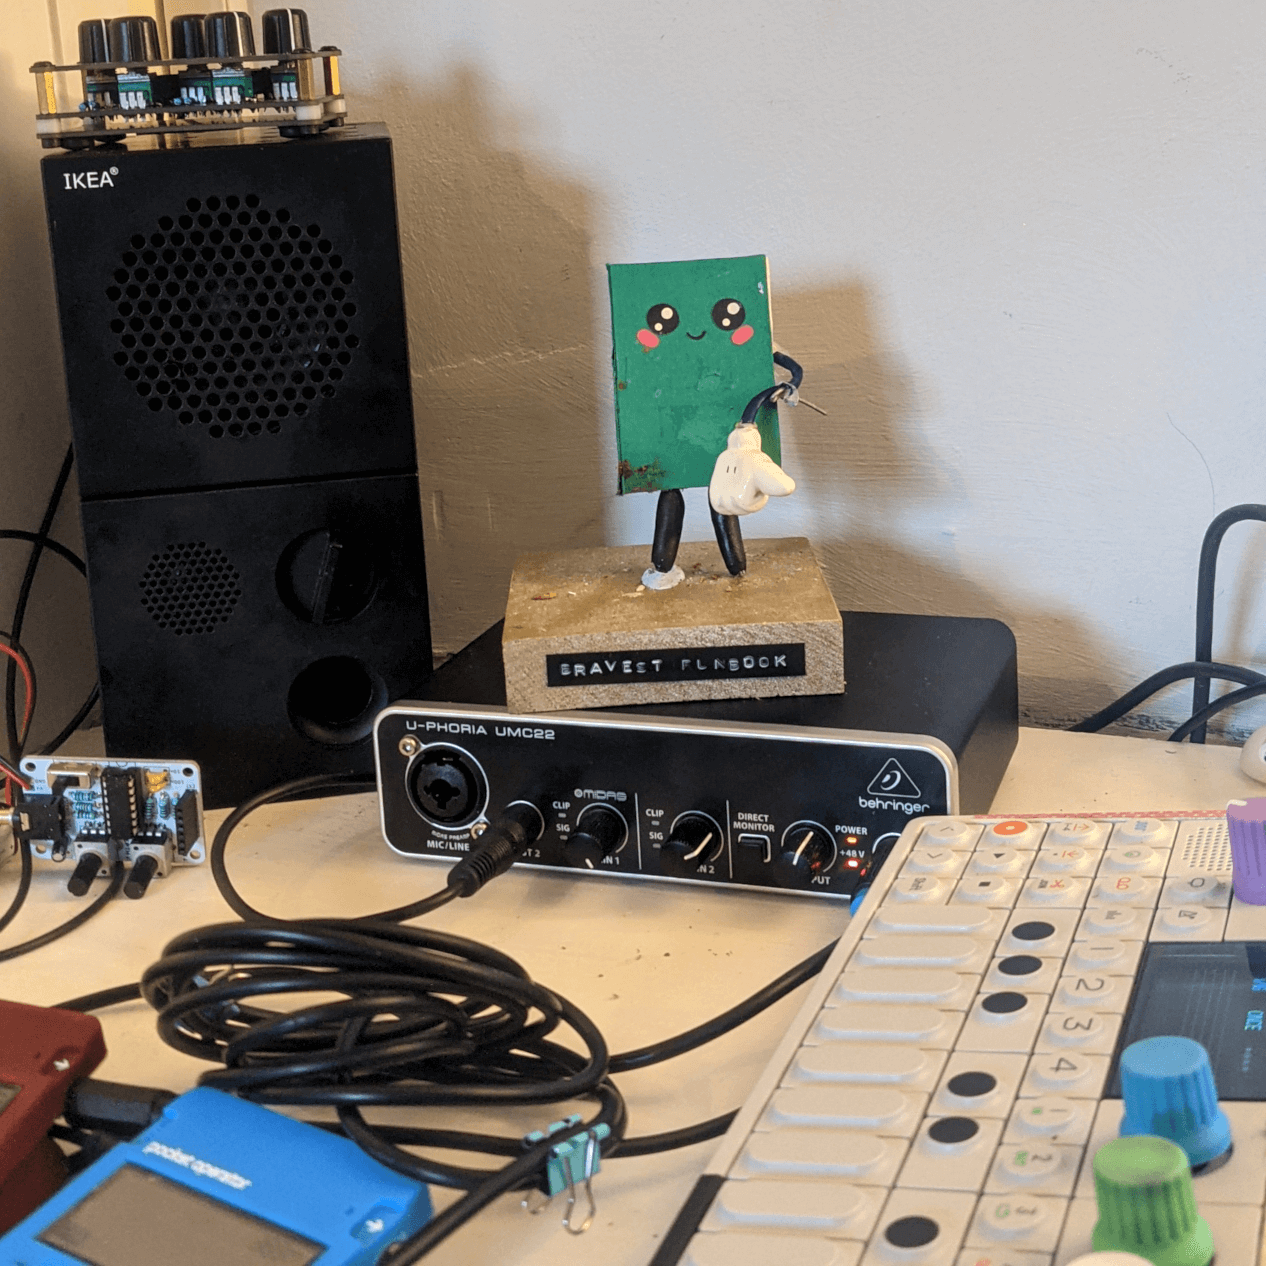 a beat-up green runbook figurine stands on top of an audio interface, looking
out over some teenage engineering synths. it is making a groovy sideways thumb
gesture with its remaining arm